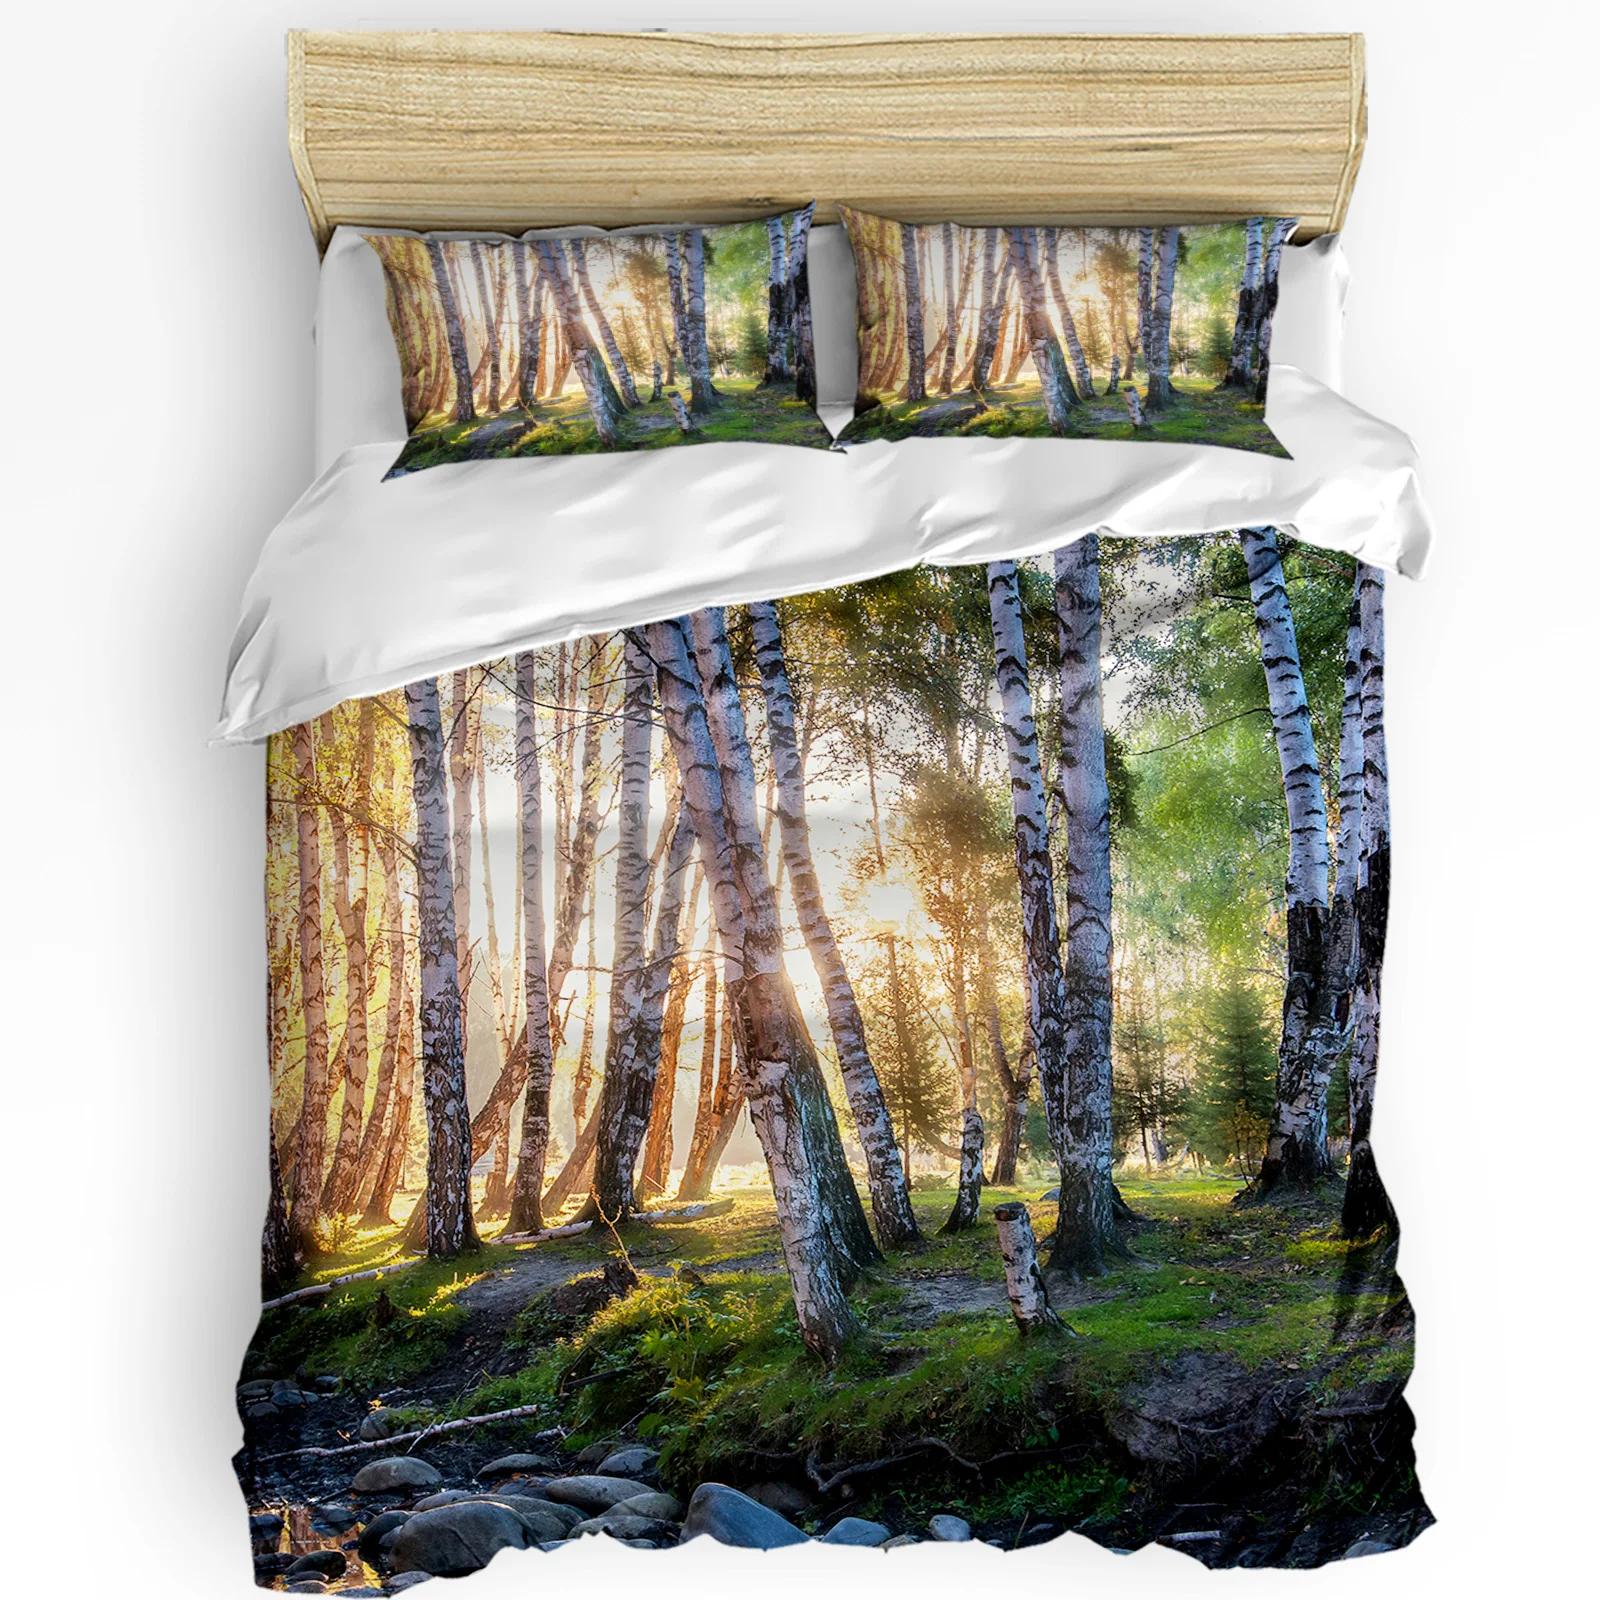 Birch Forest Woods Early Morning Duvet CoverPillow Case Custom 3pcs Bedding Set Quilt Cover Double Bed Home Textile